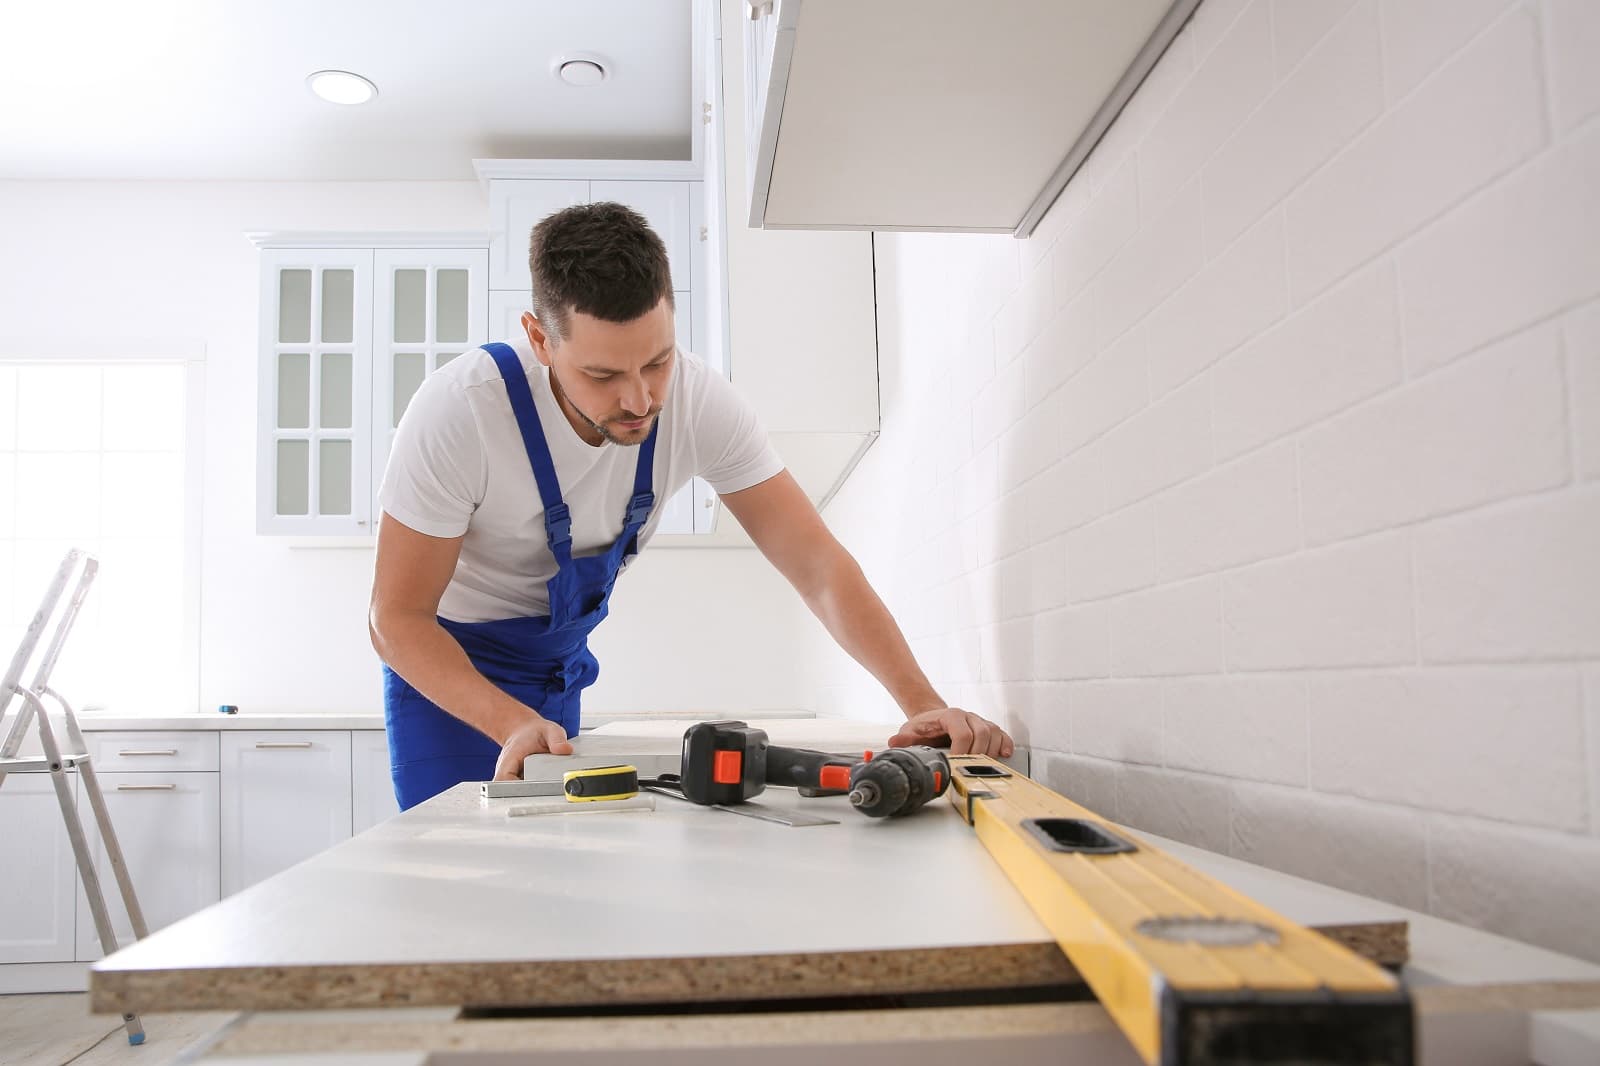 A Homeowner’s Guide To Installing New Kitchen Countertops. Leveling the top on the furniture